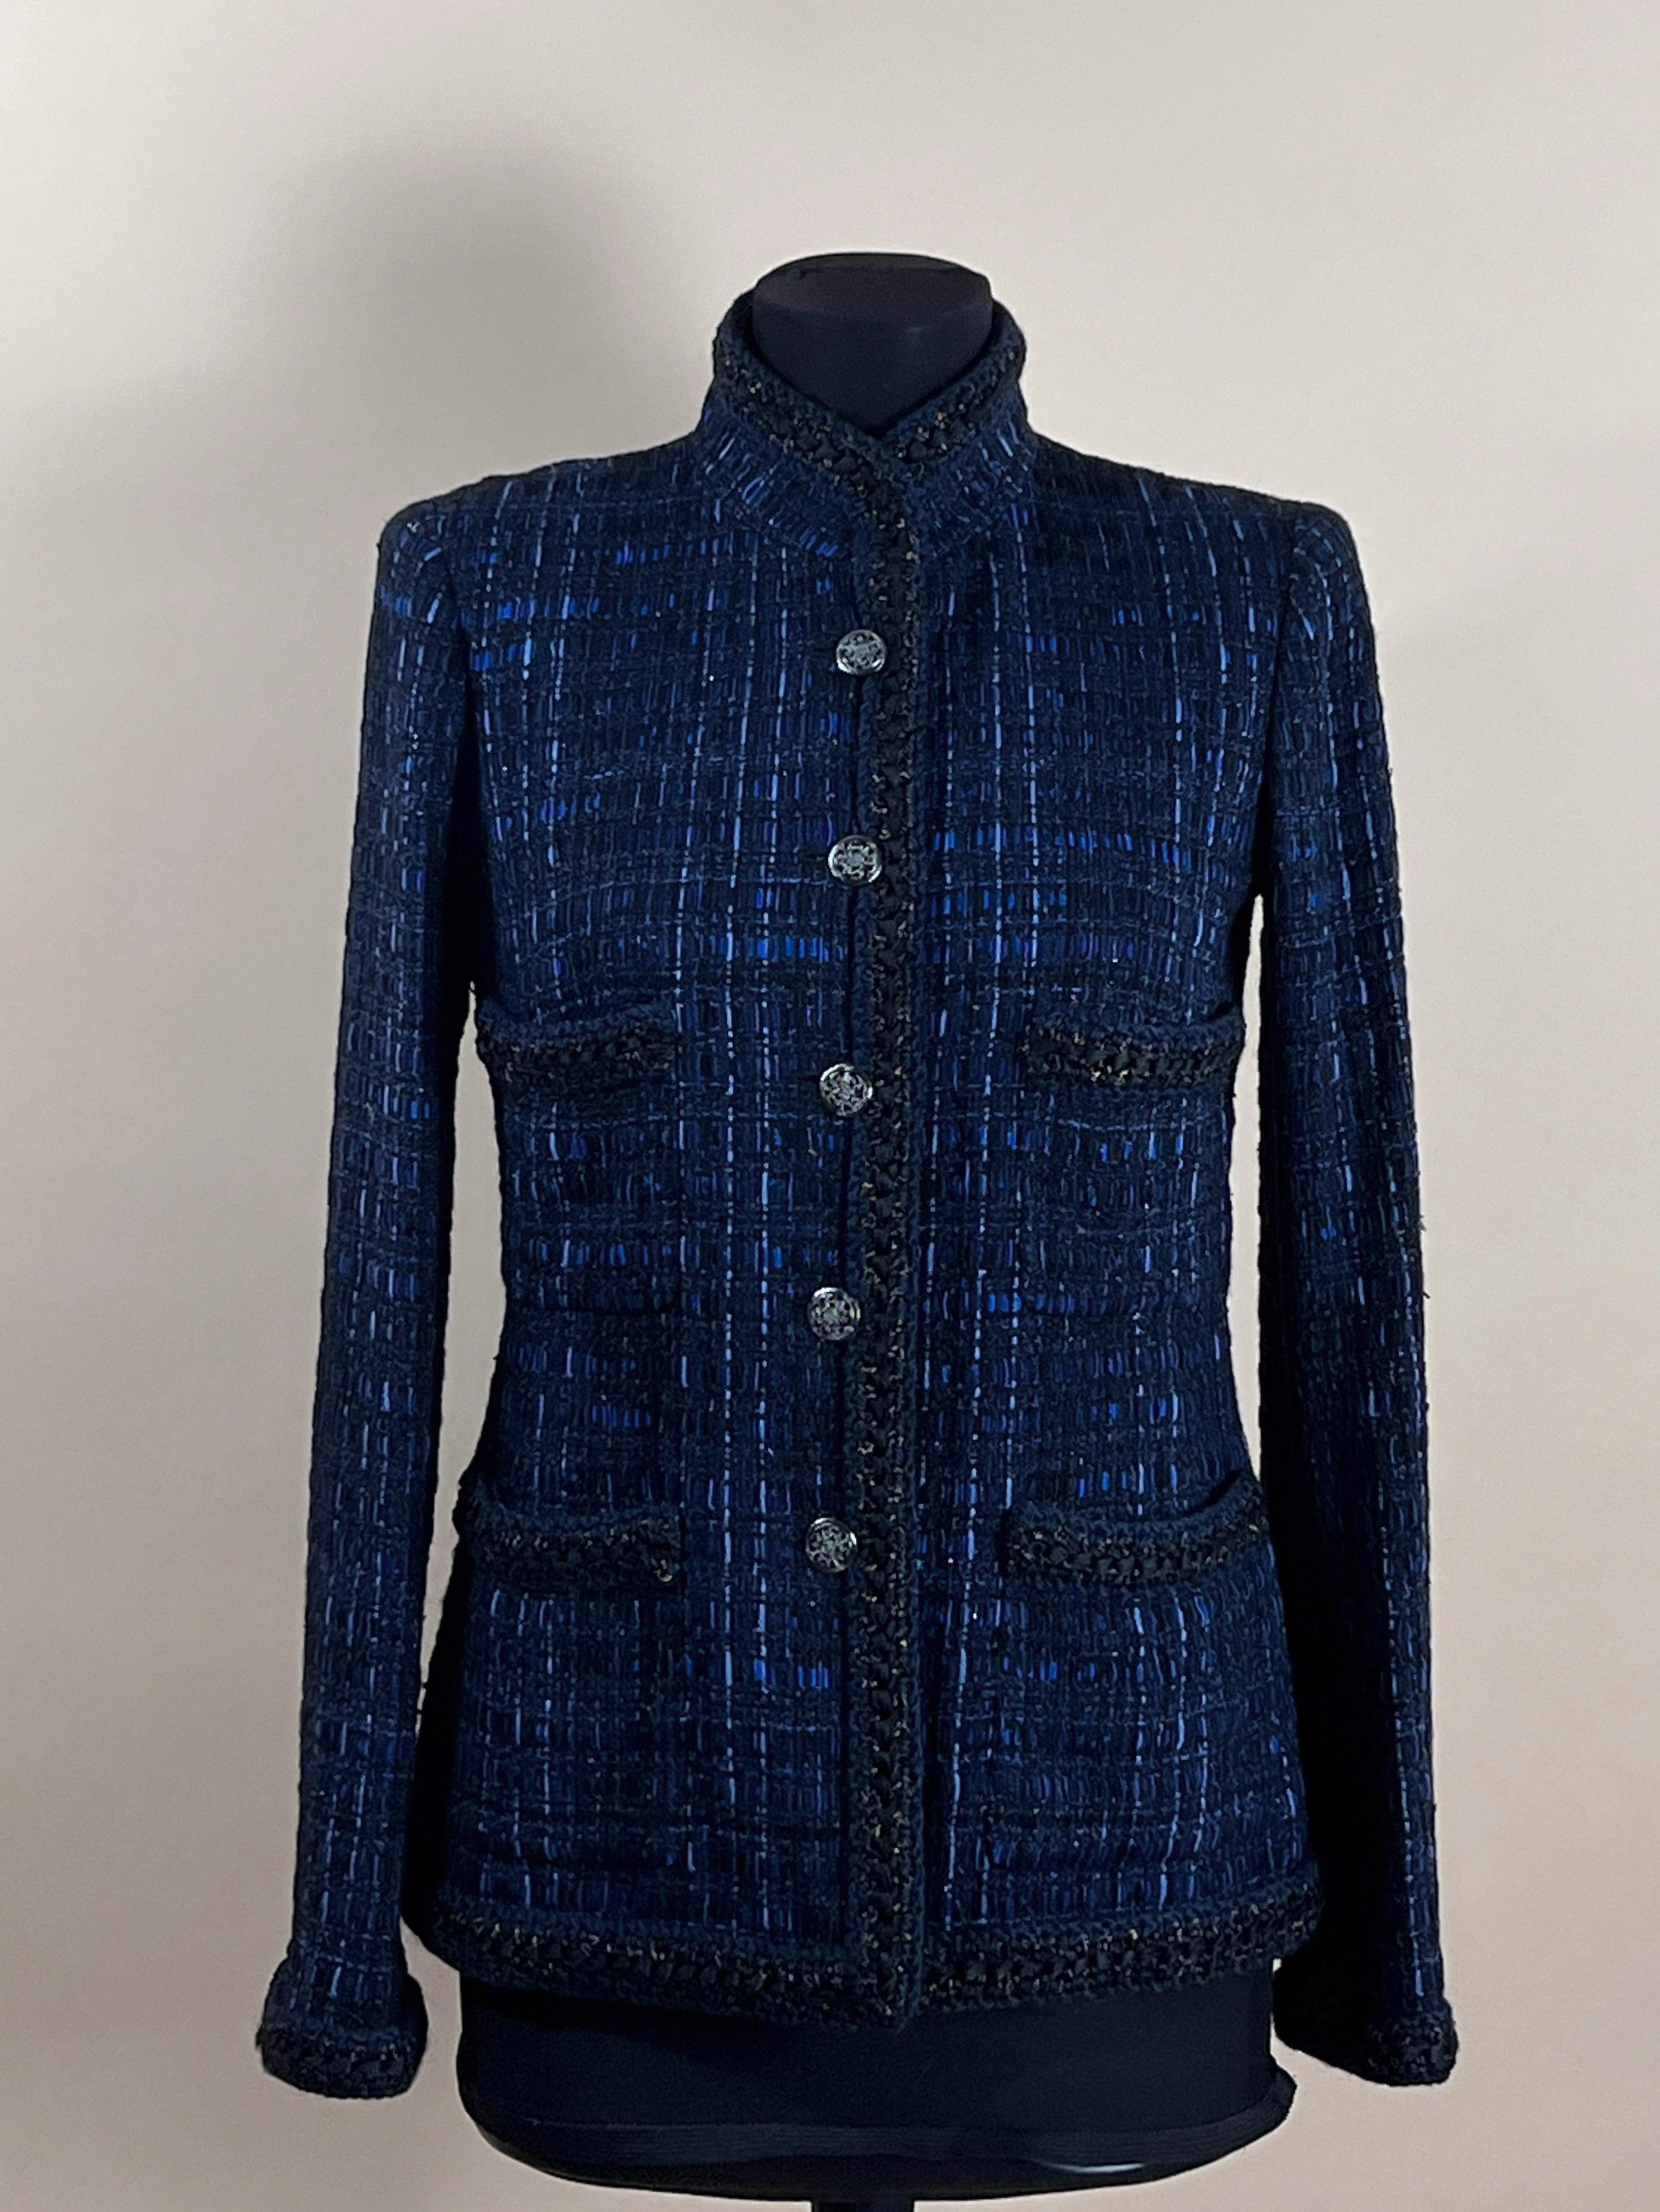 Women's Chanel Shanghai Collection Ribbon Tweed Jacket, 2010